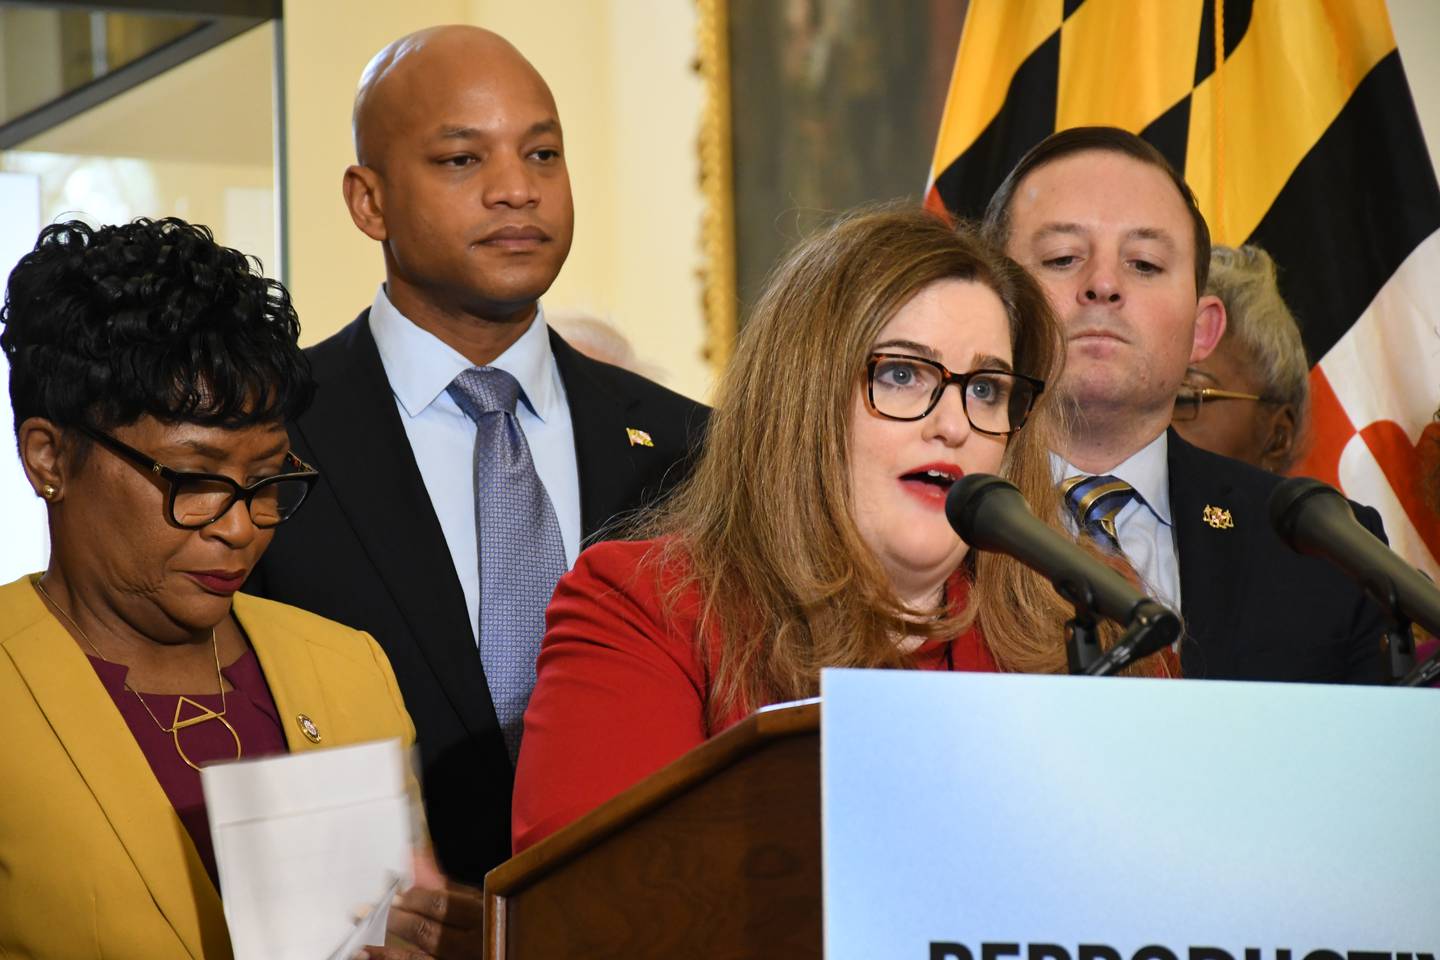 Del. Ariana Kelly talks about proposals to protect access to abortion during a press conference at the State House in Annapolis on Thursday, Feb. 9, 2023. She's joined by other leaders including House of Delegates Speaker Adrienne A. Jones, Gov. Wes Moore and Senate President Bill Ferguson.